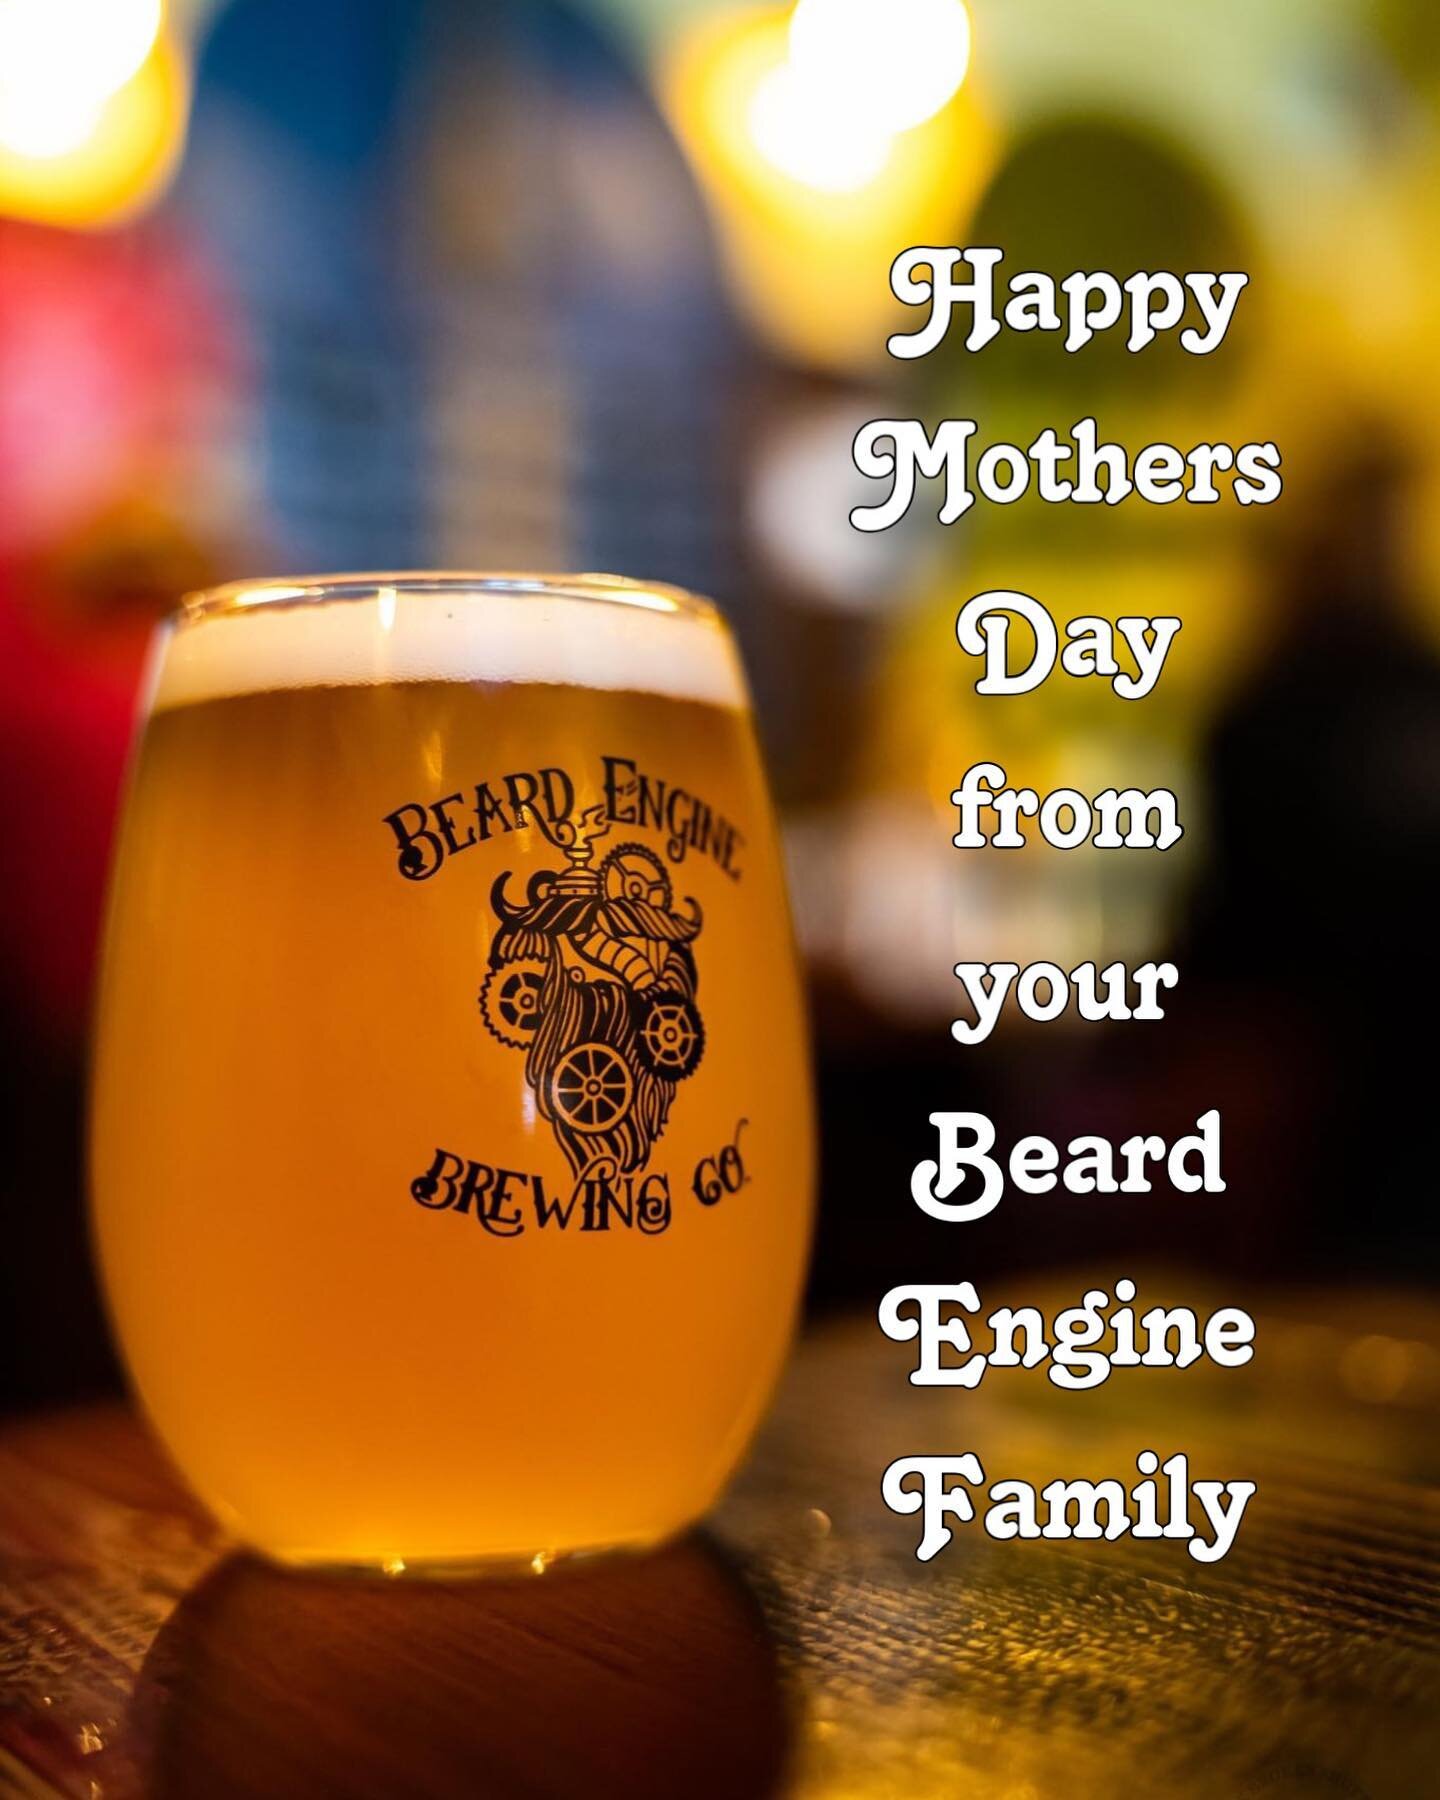 &ldquo;Mother's love is the fuel that enables a normal human being to do the impossible.&rdquo;

❤️We will be here from 1-6pm pouring those special Mothers Day Pints. Bring your mom in and her first pint is on us,and after that&hellip;.let mom unwind